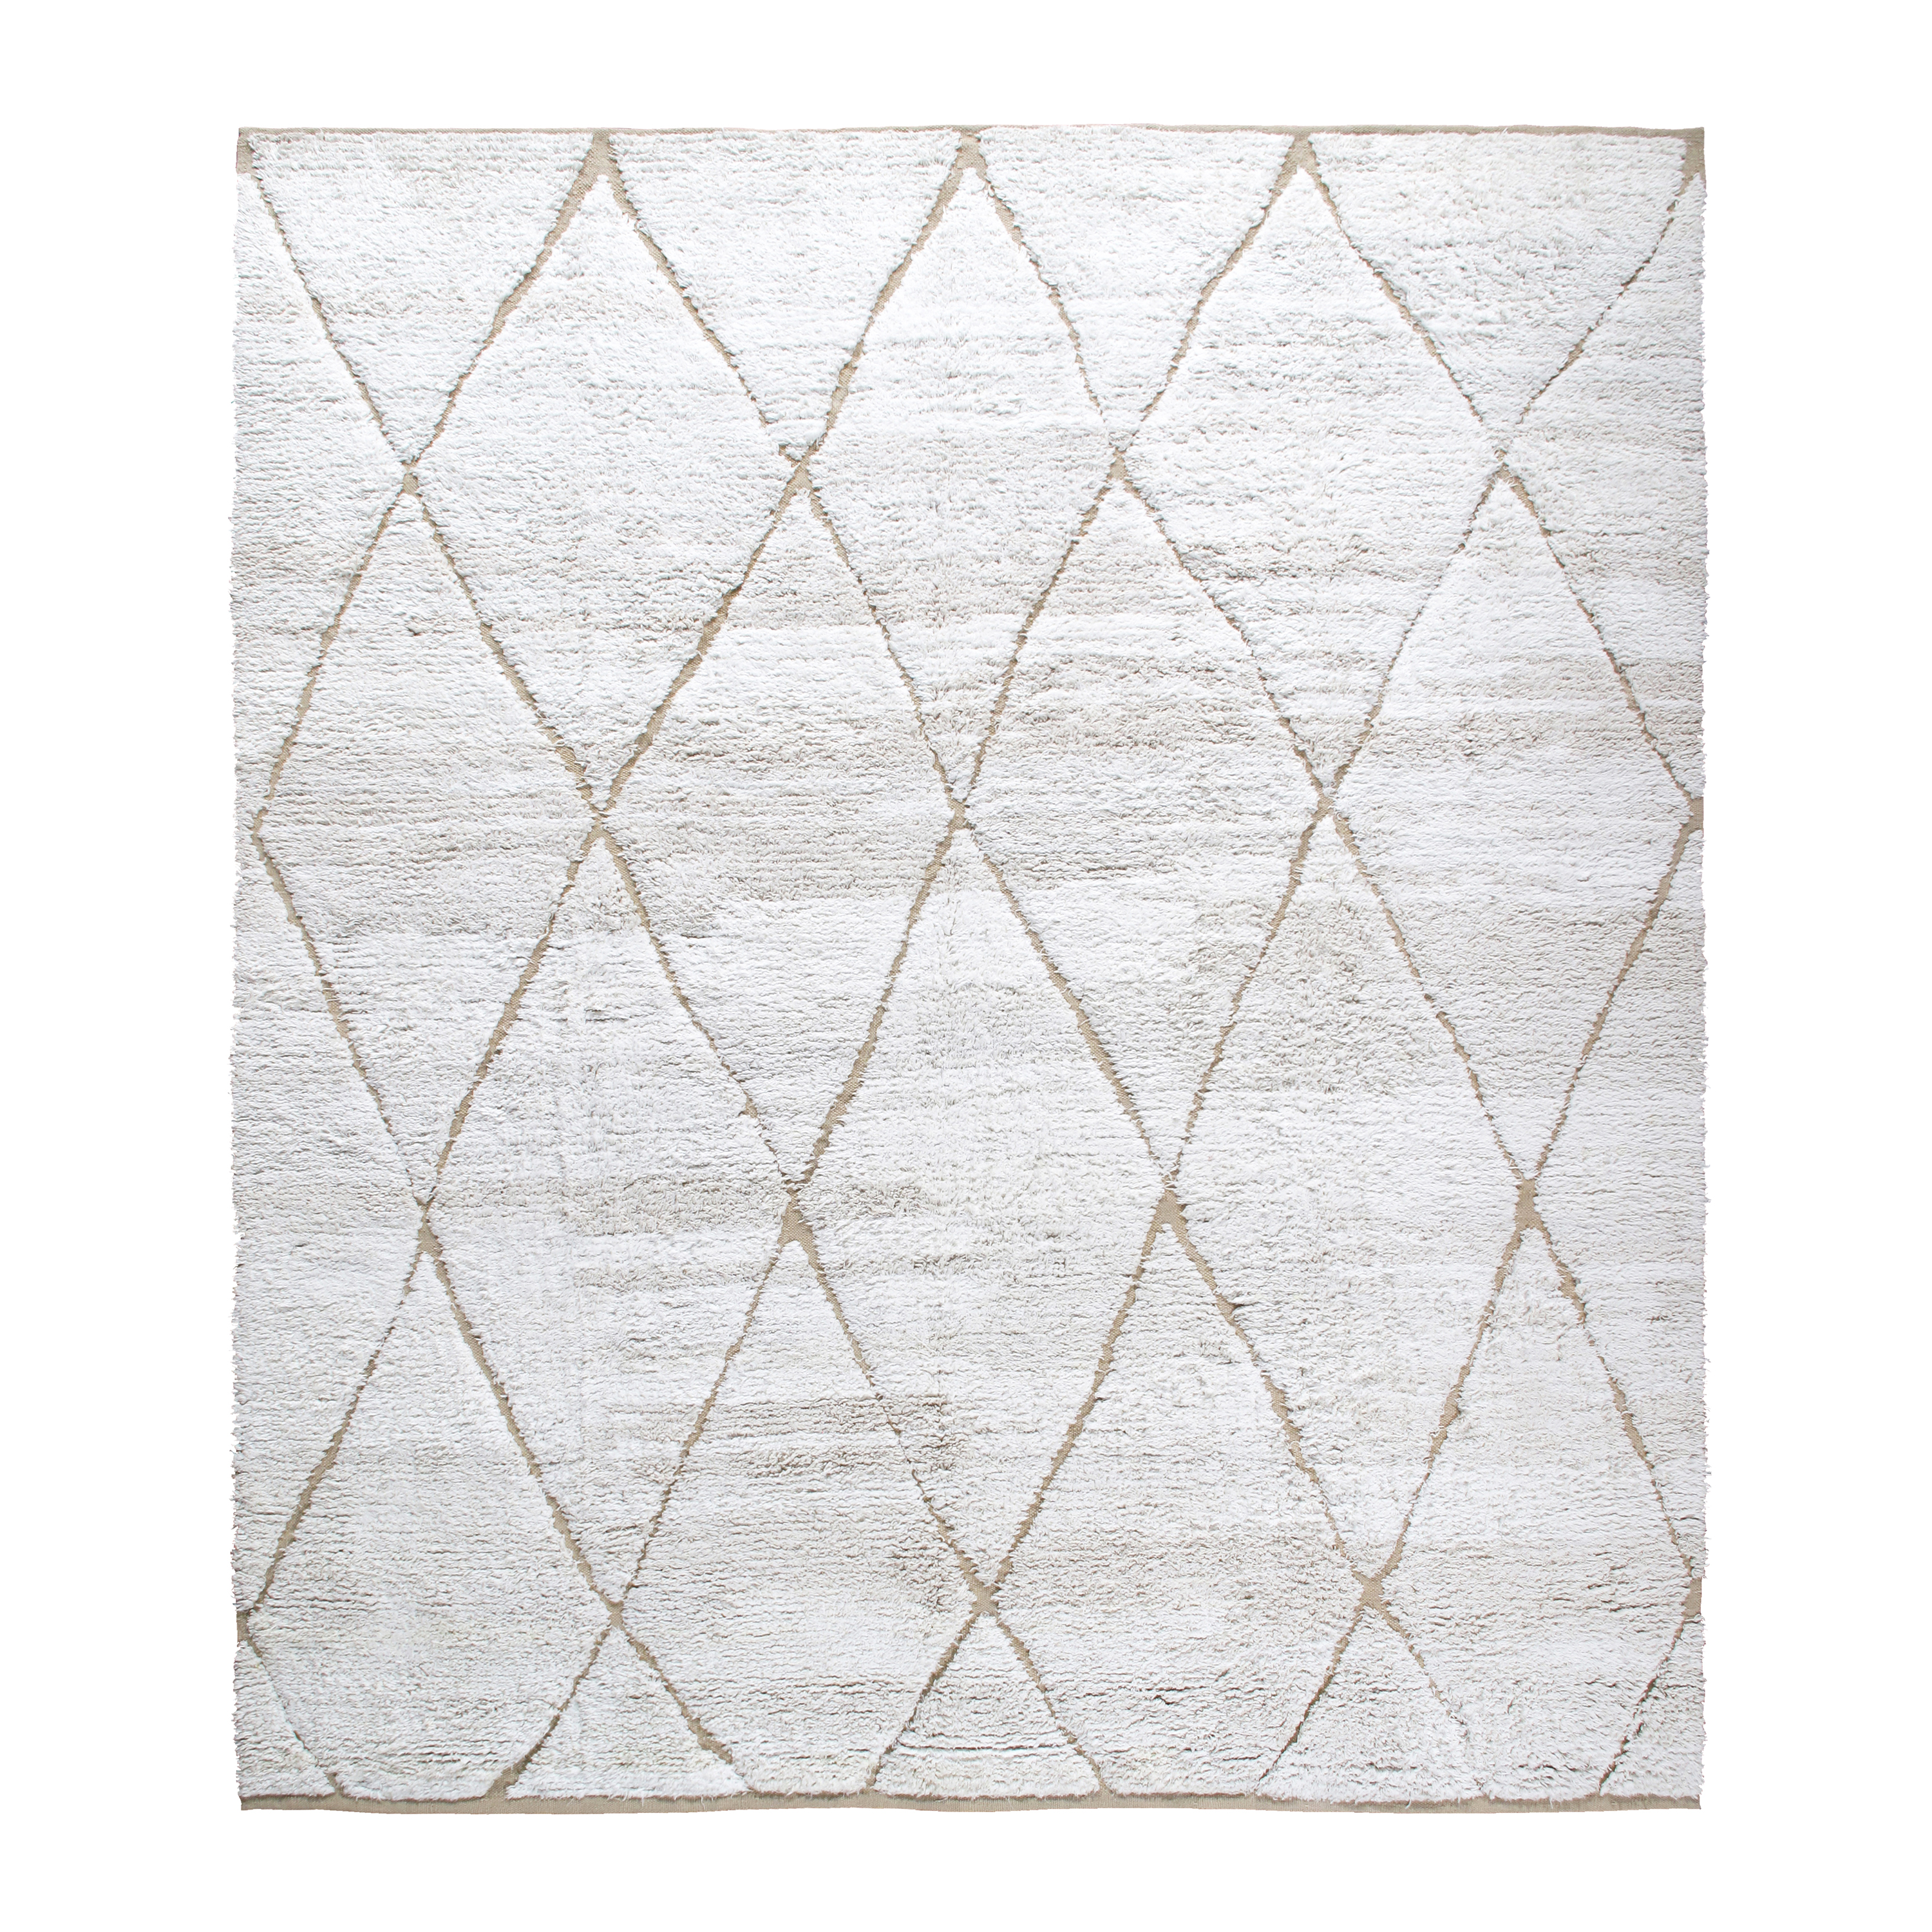 This Moroccan rug is Hand-knotted and and made of using recycle hemp.